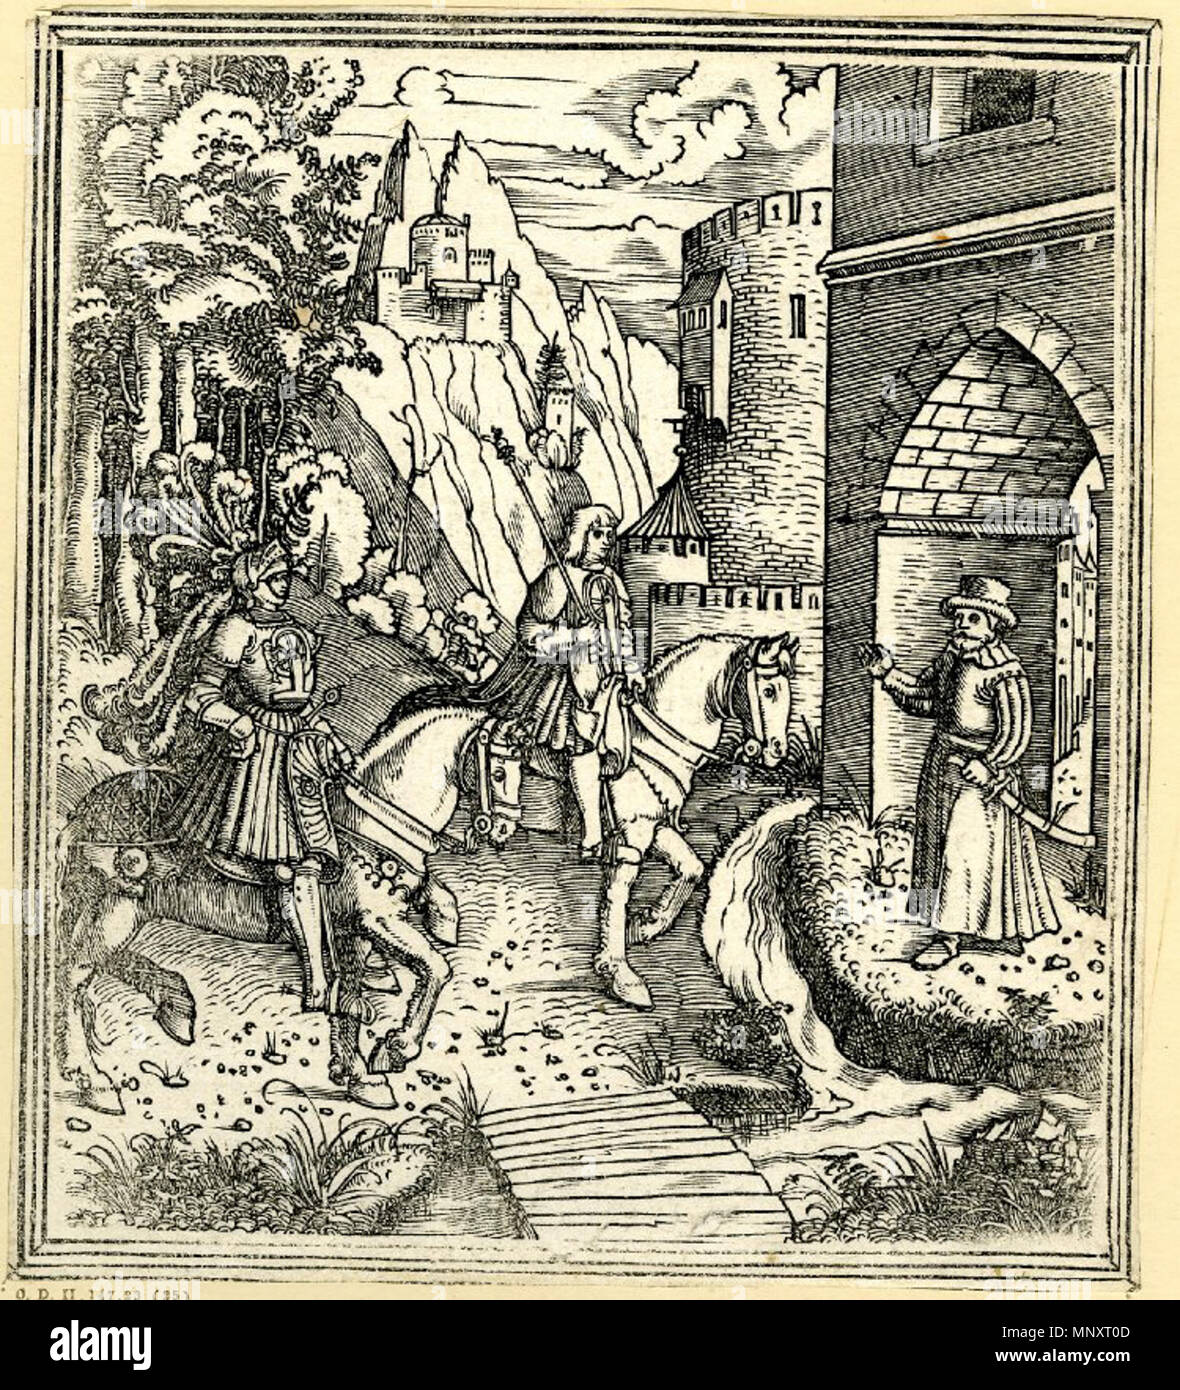 . English: Theuerdank and Ernhold meeting Unfalo; Theuerdank and Ernhold on horseback at left, arriving at a city gate underneath which Unfalo is standing at right; landscape background. Illustration to Melchior Pfinzing, 'Theuerdank'. Woodcut . between 1511 and 1517. Hans Weiditz 1186 Theuerdank 25 Stock Photo